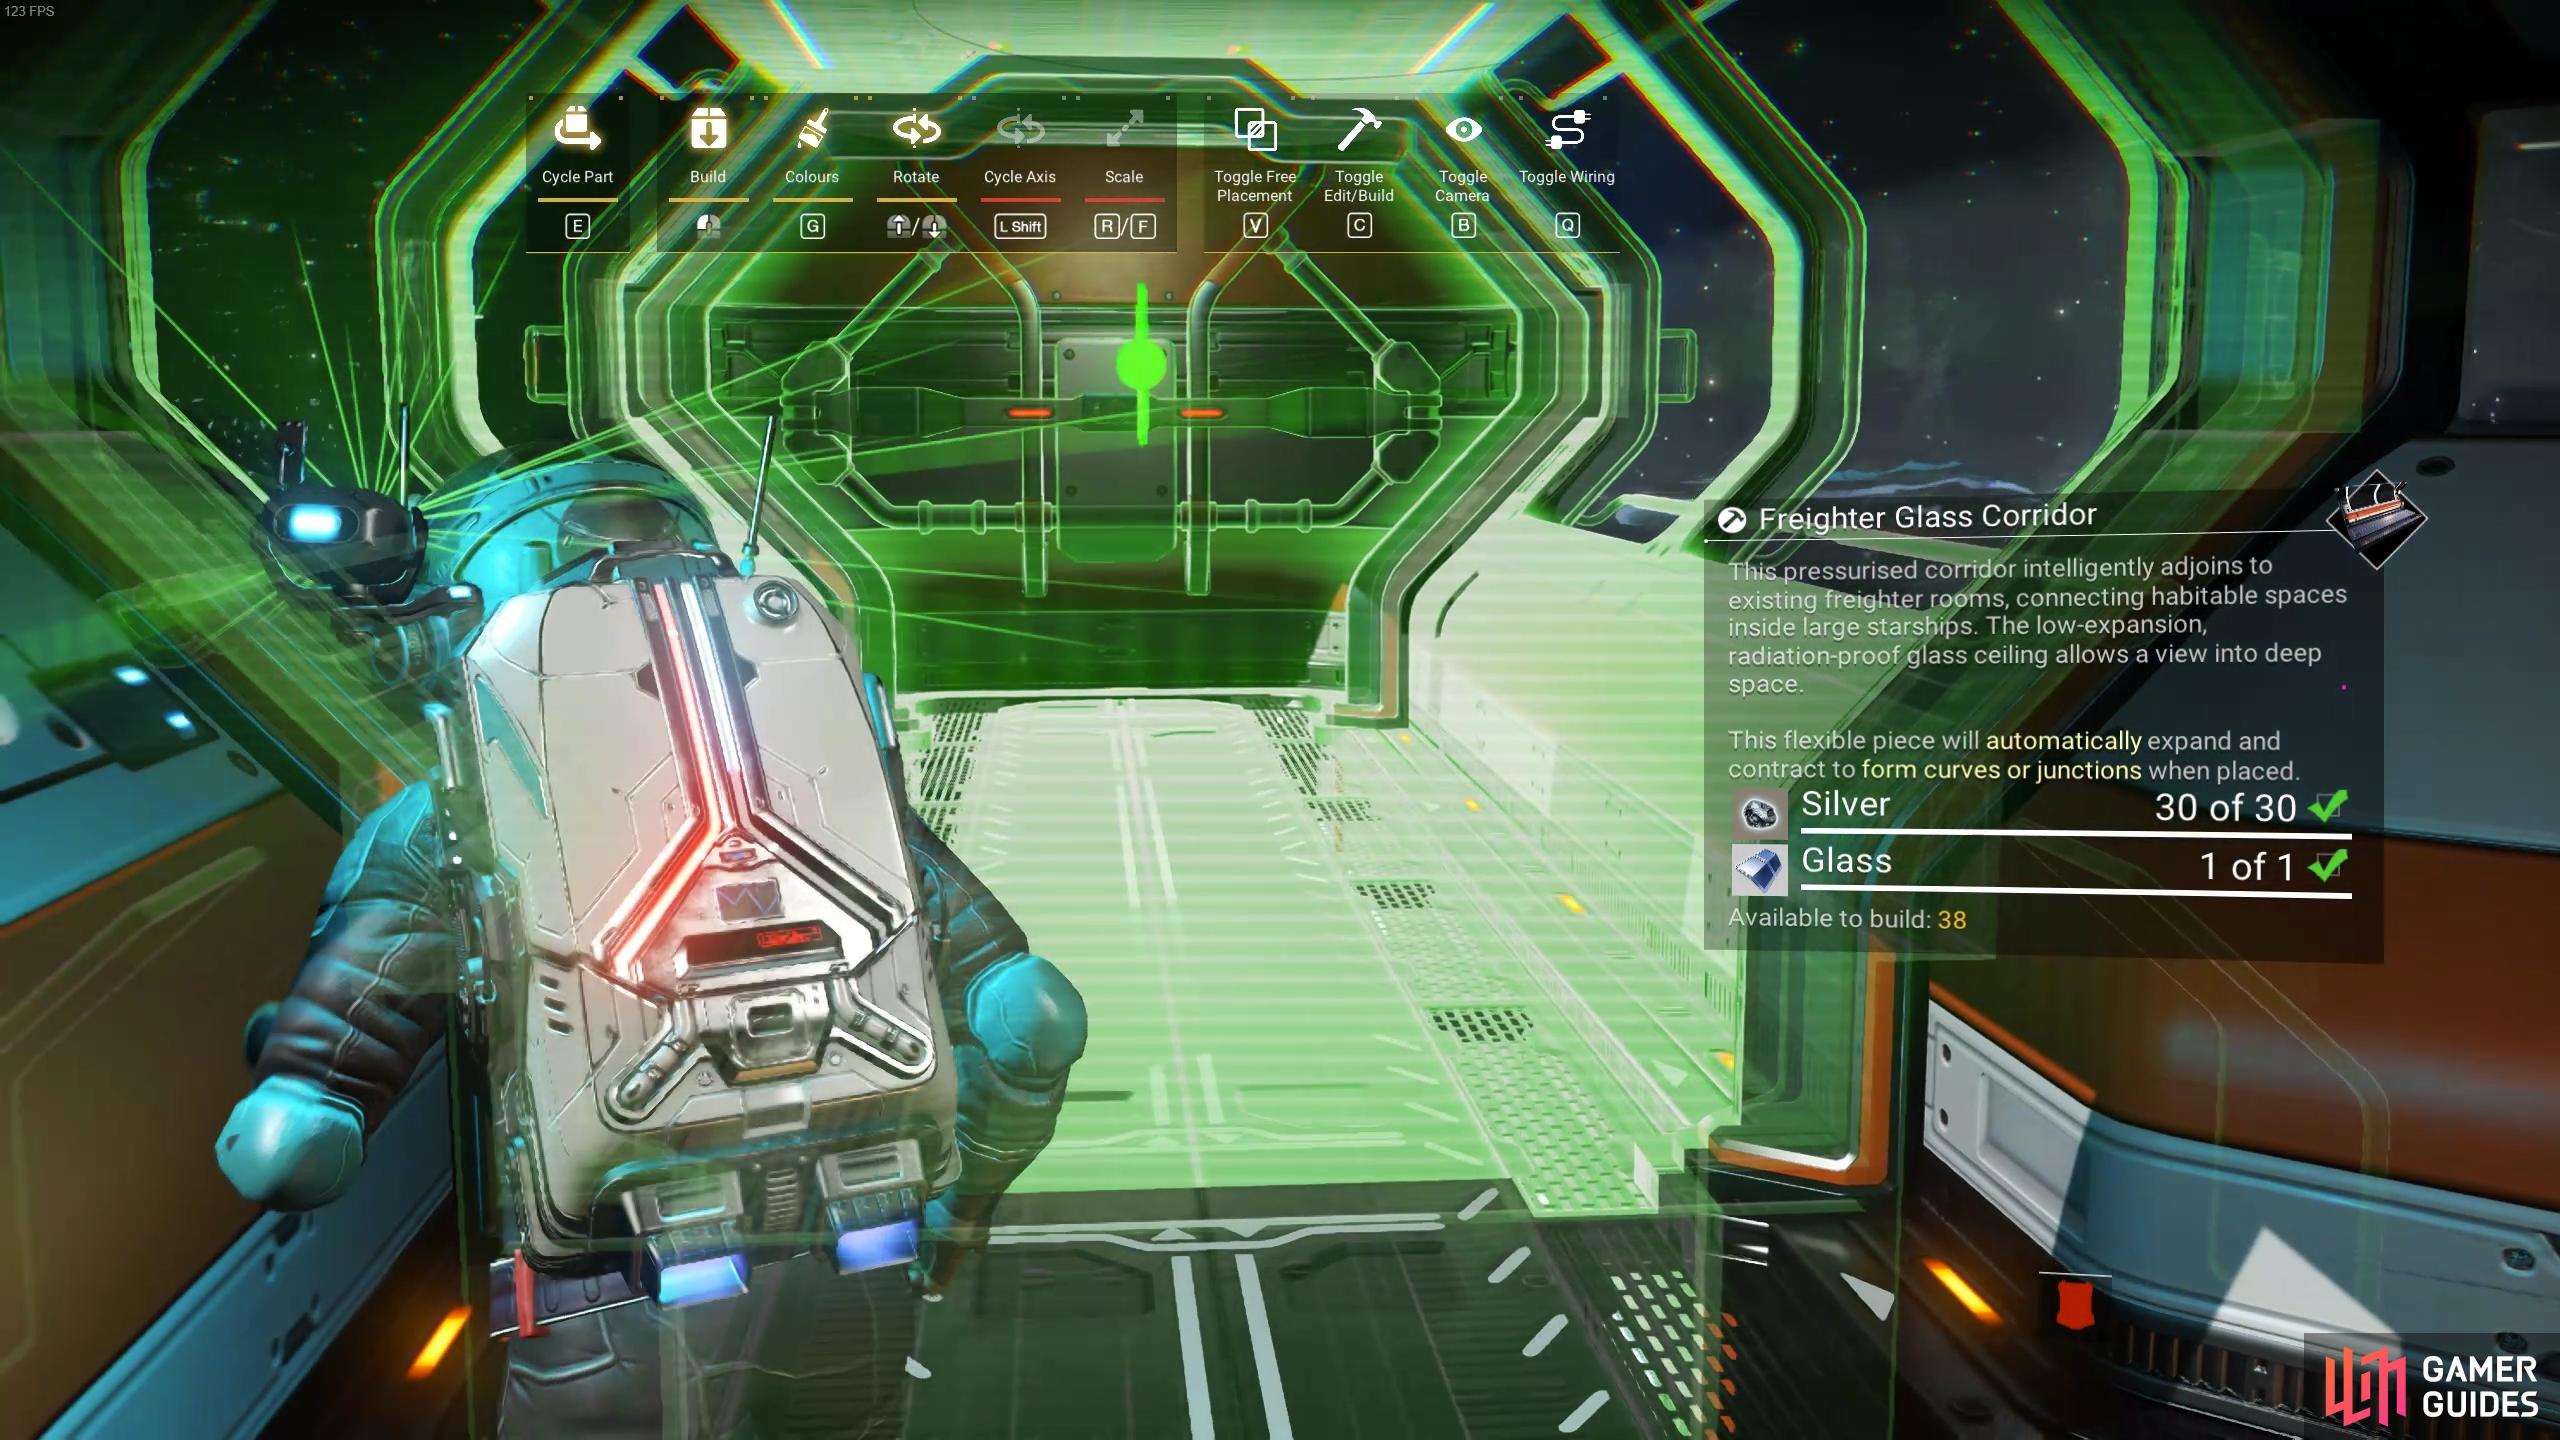 You can now construct an exterior catwalk with windows on Freighters.